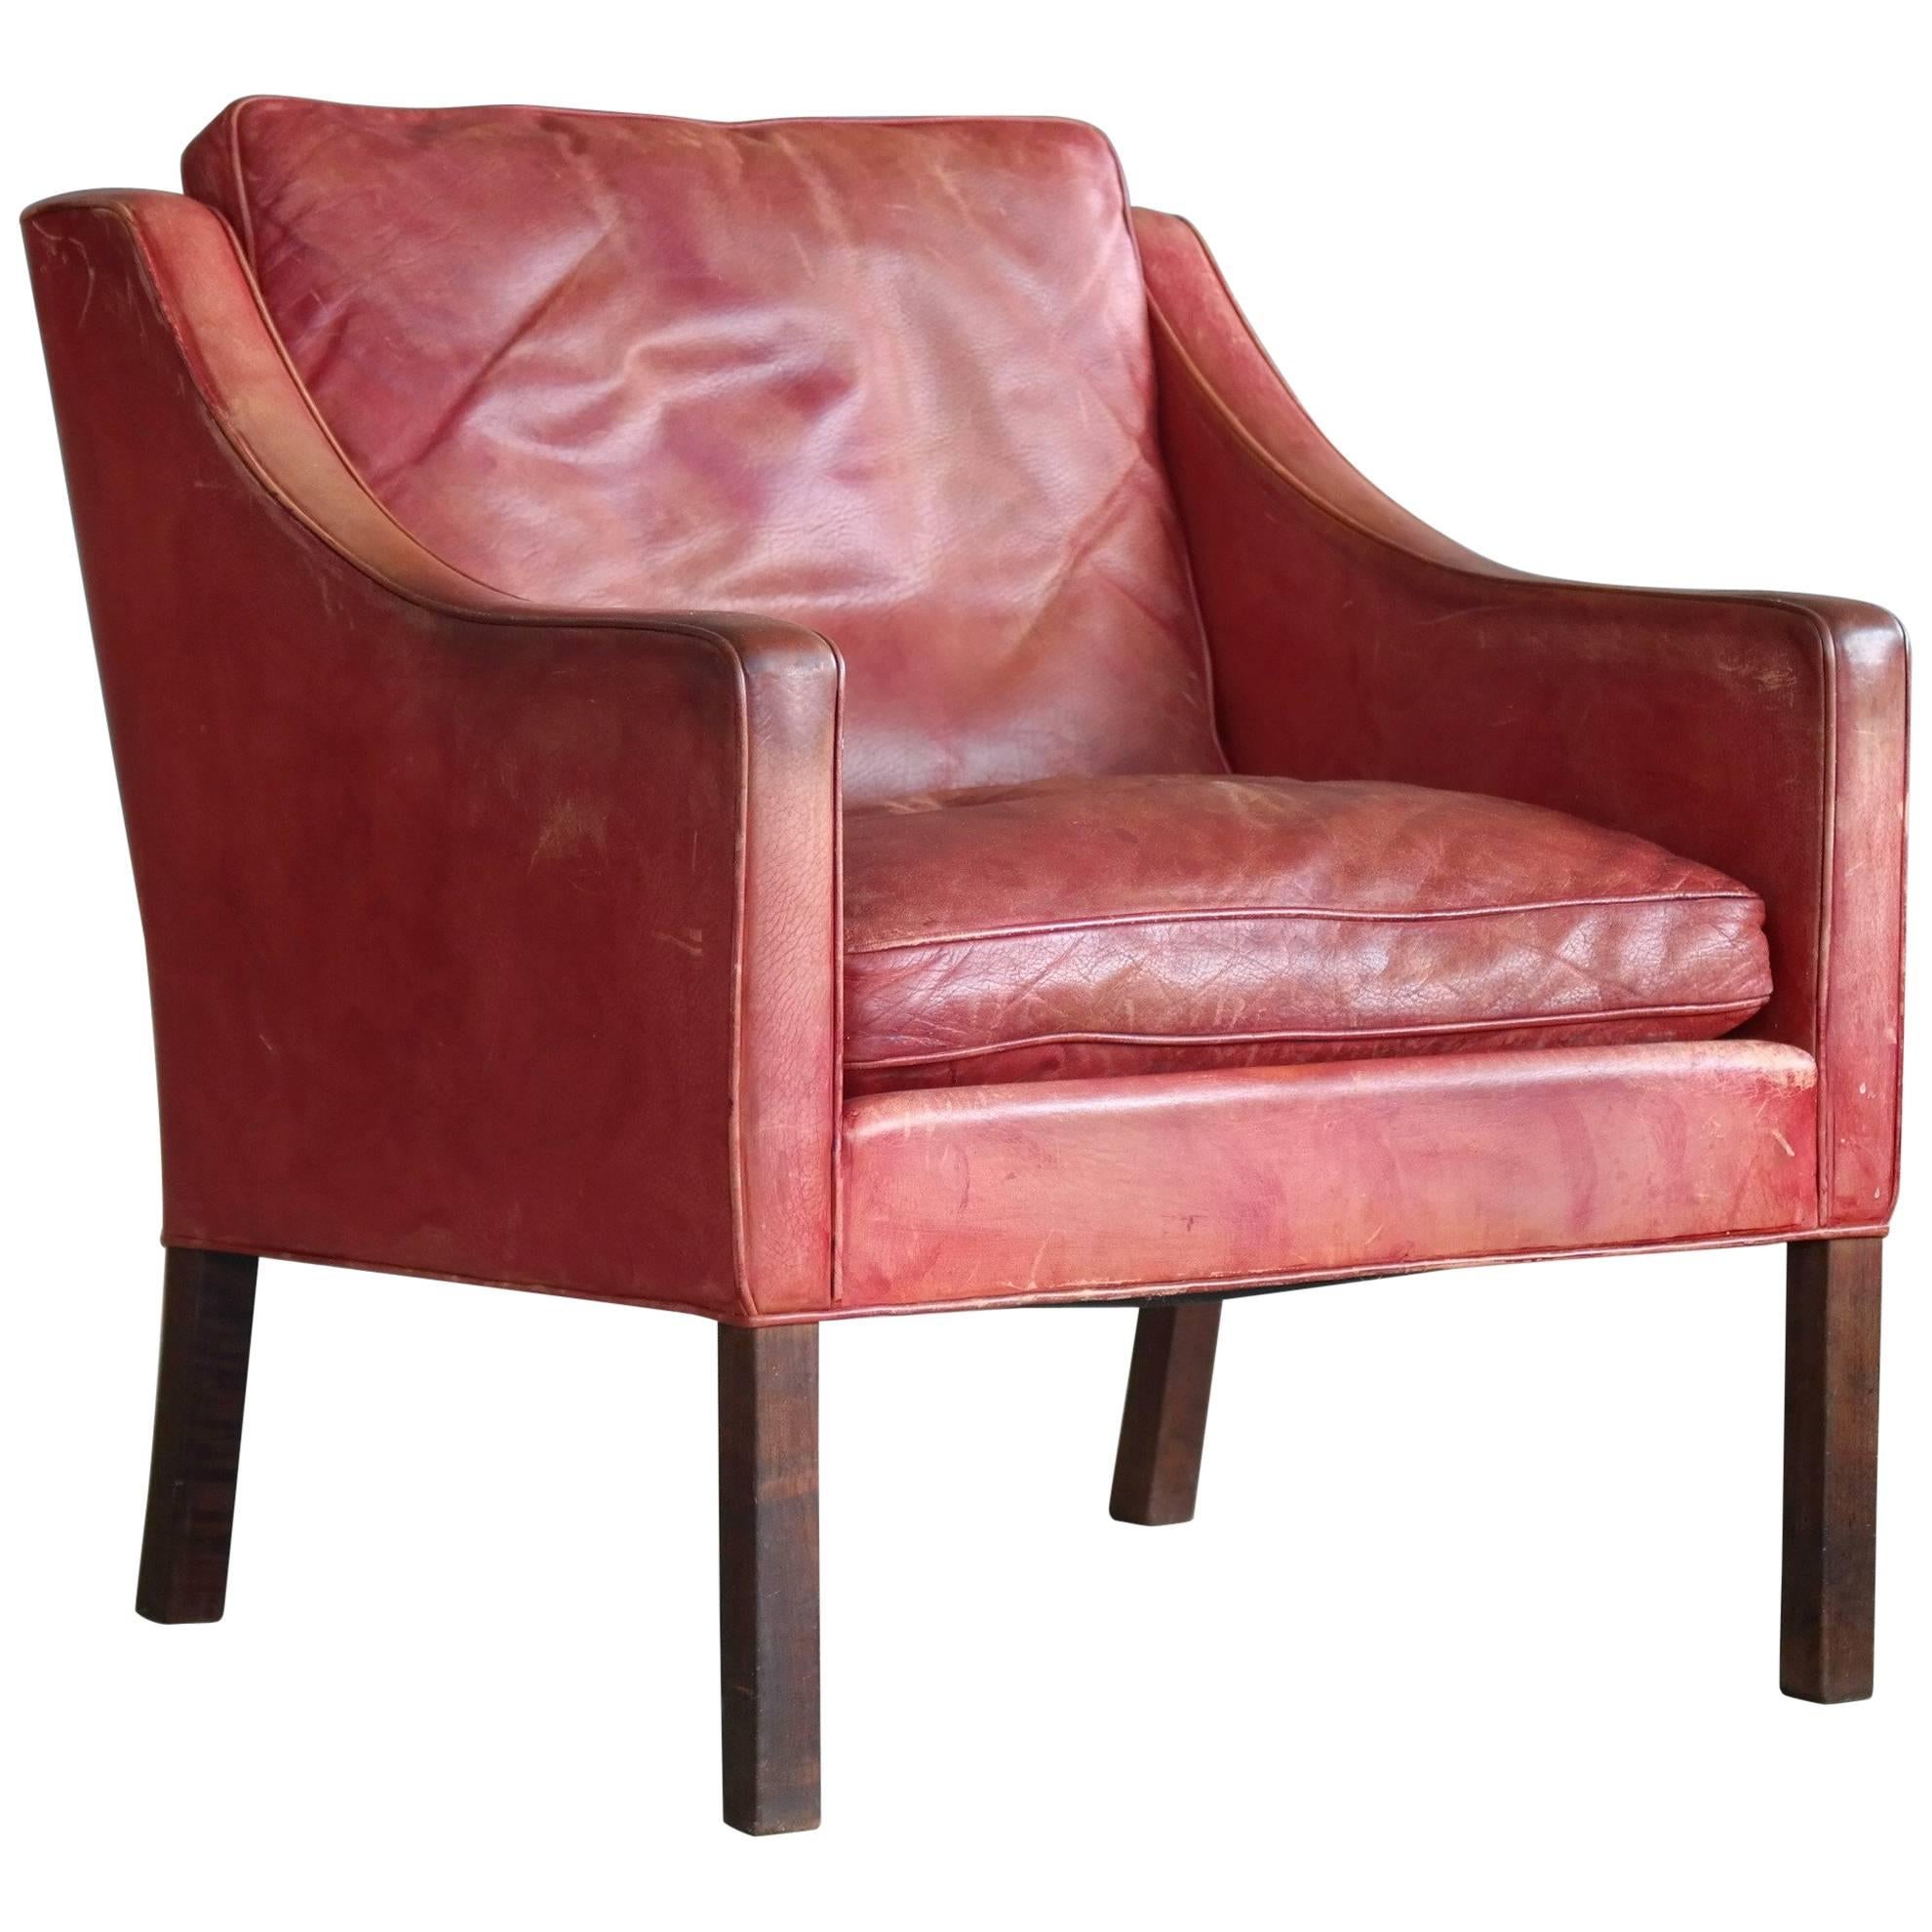 Børge Mogensen Lounge Chair Model 2207 in Red Leather for Fredericia